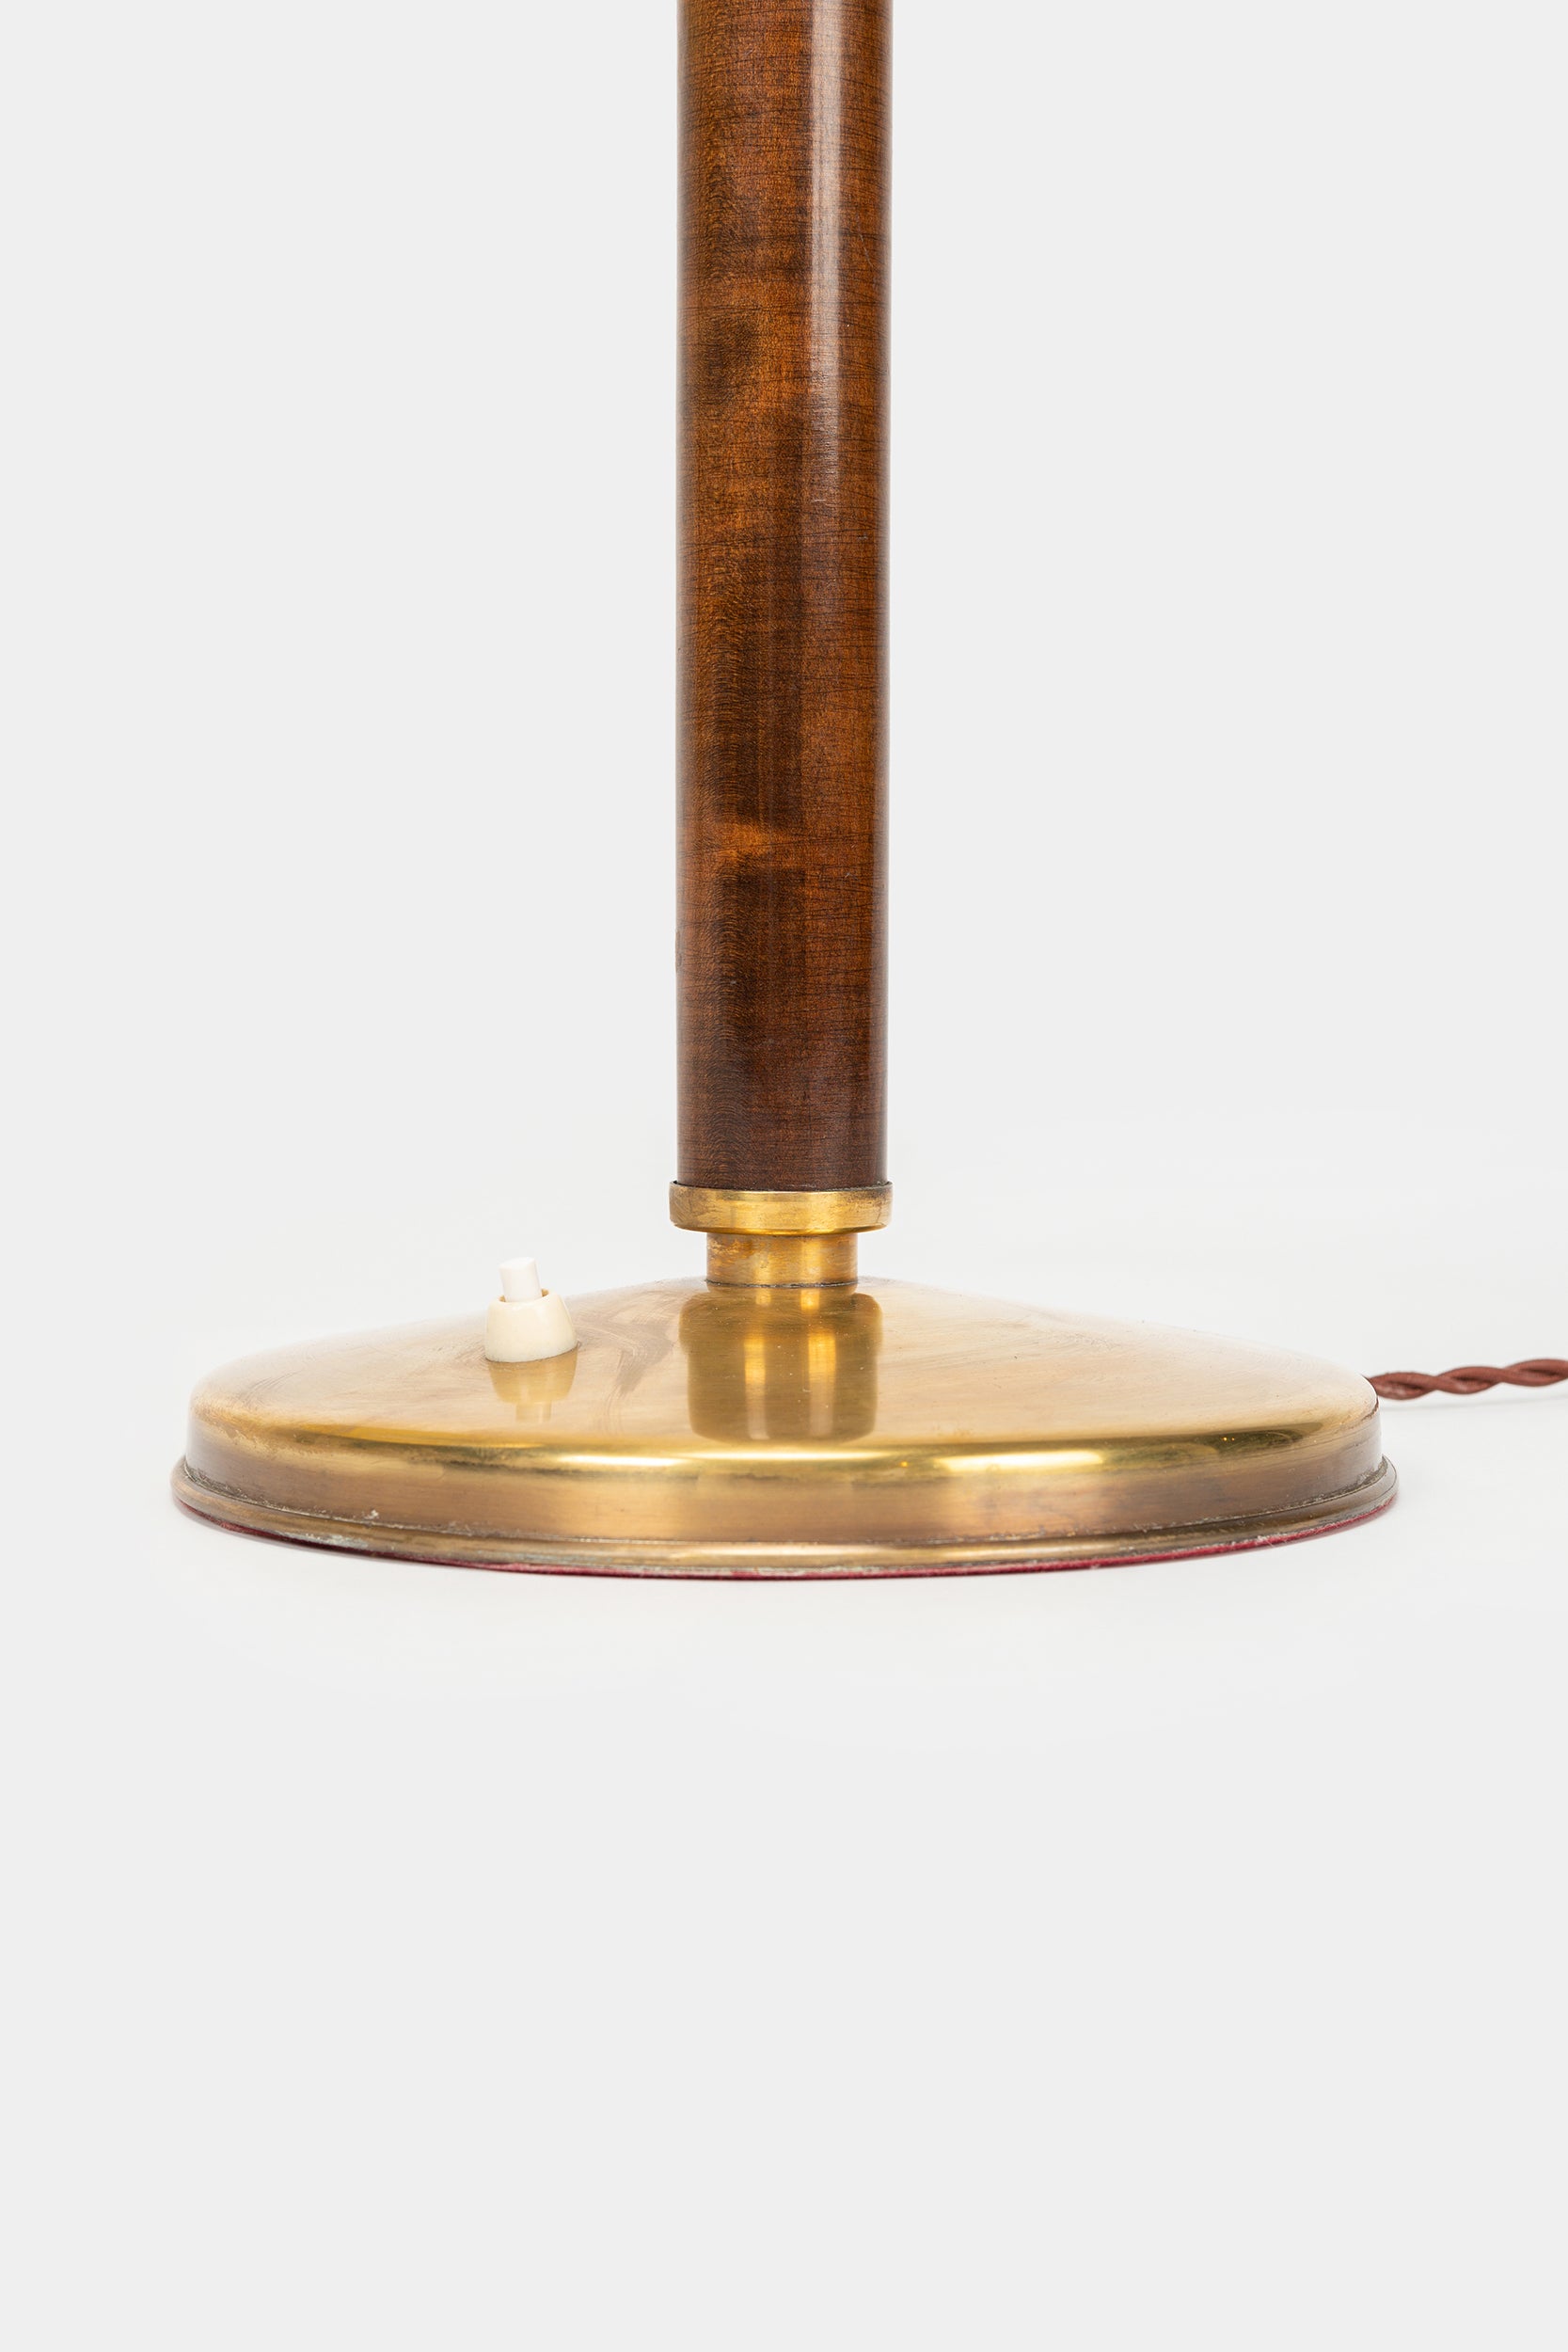 Alfred Müller, Table Lamp, Brass and Walnut, 30s